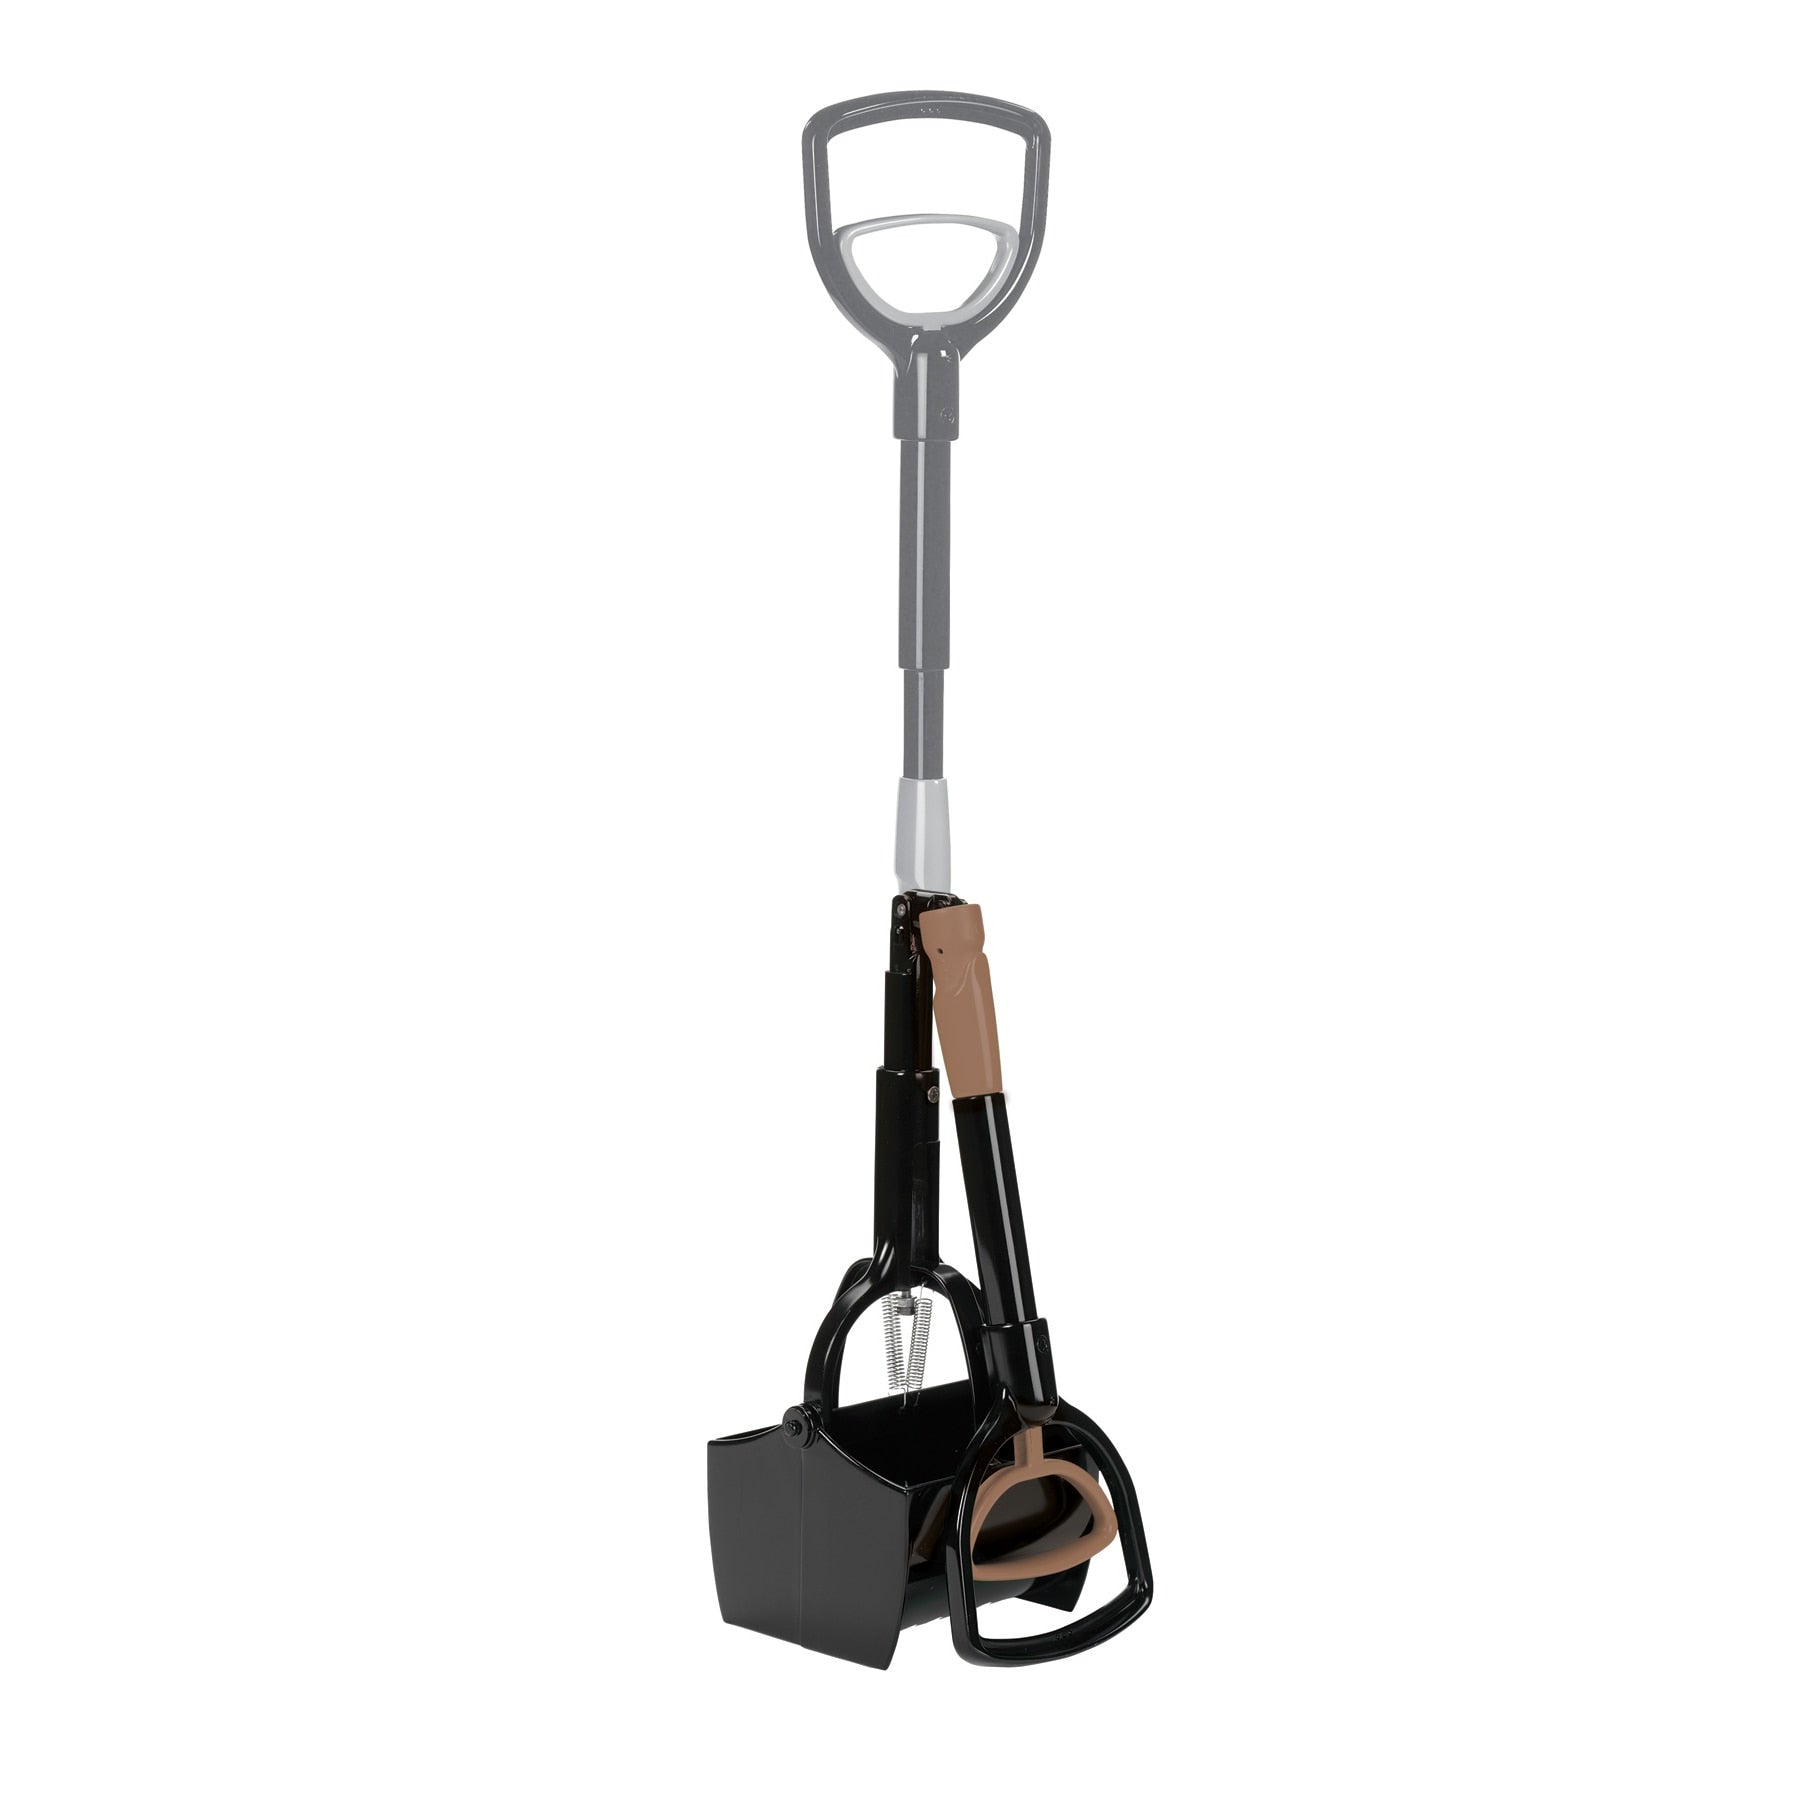 Arm & Hammer Claw Scoop